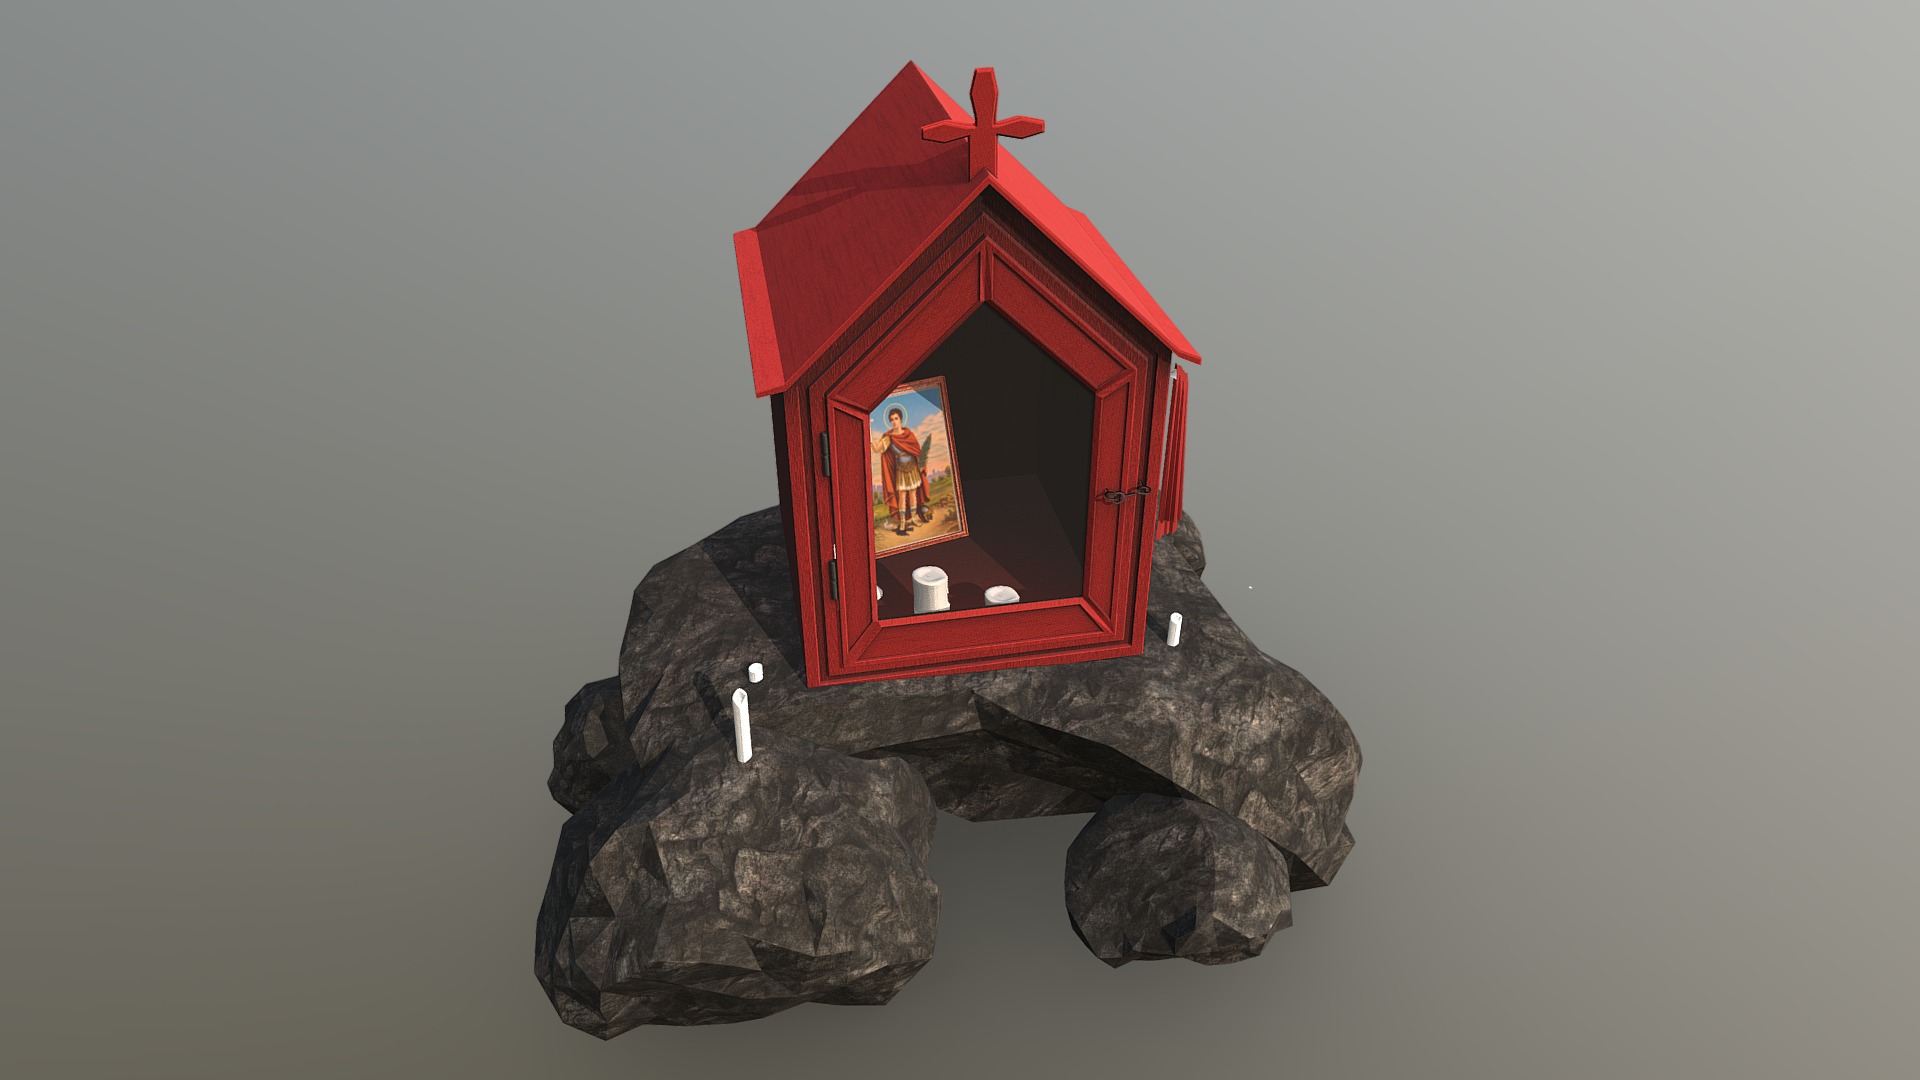 3D model MAKA .Saint Expédite - This is a 3D model of the MAKA .Saint Expédite. The 3D model is about a small red house on a rock.